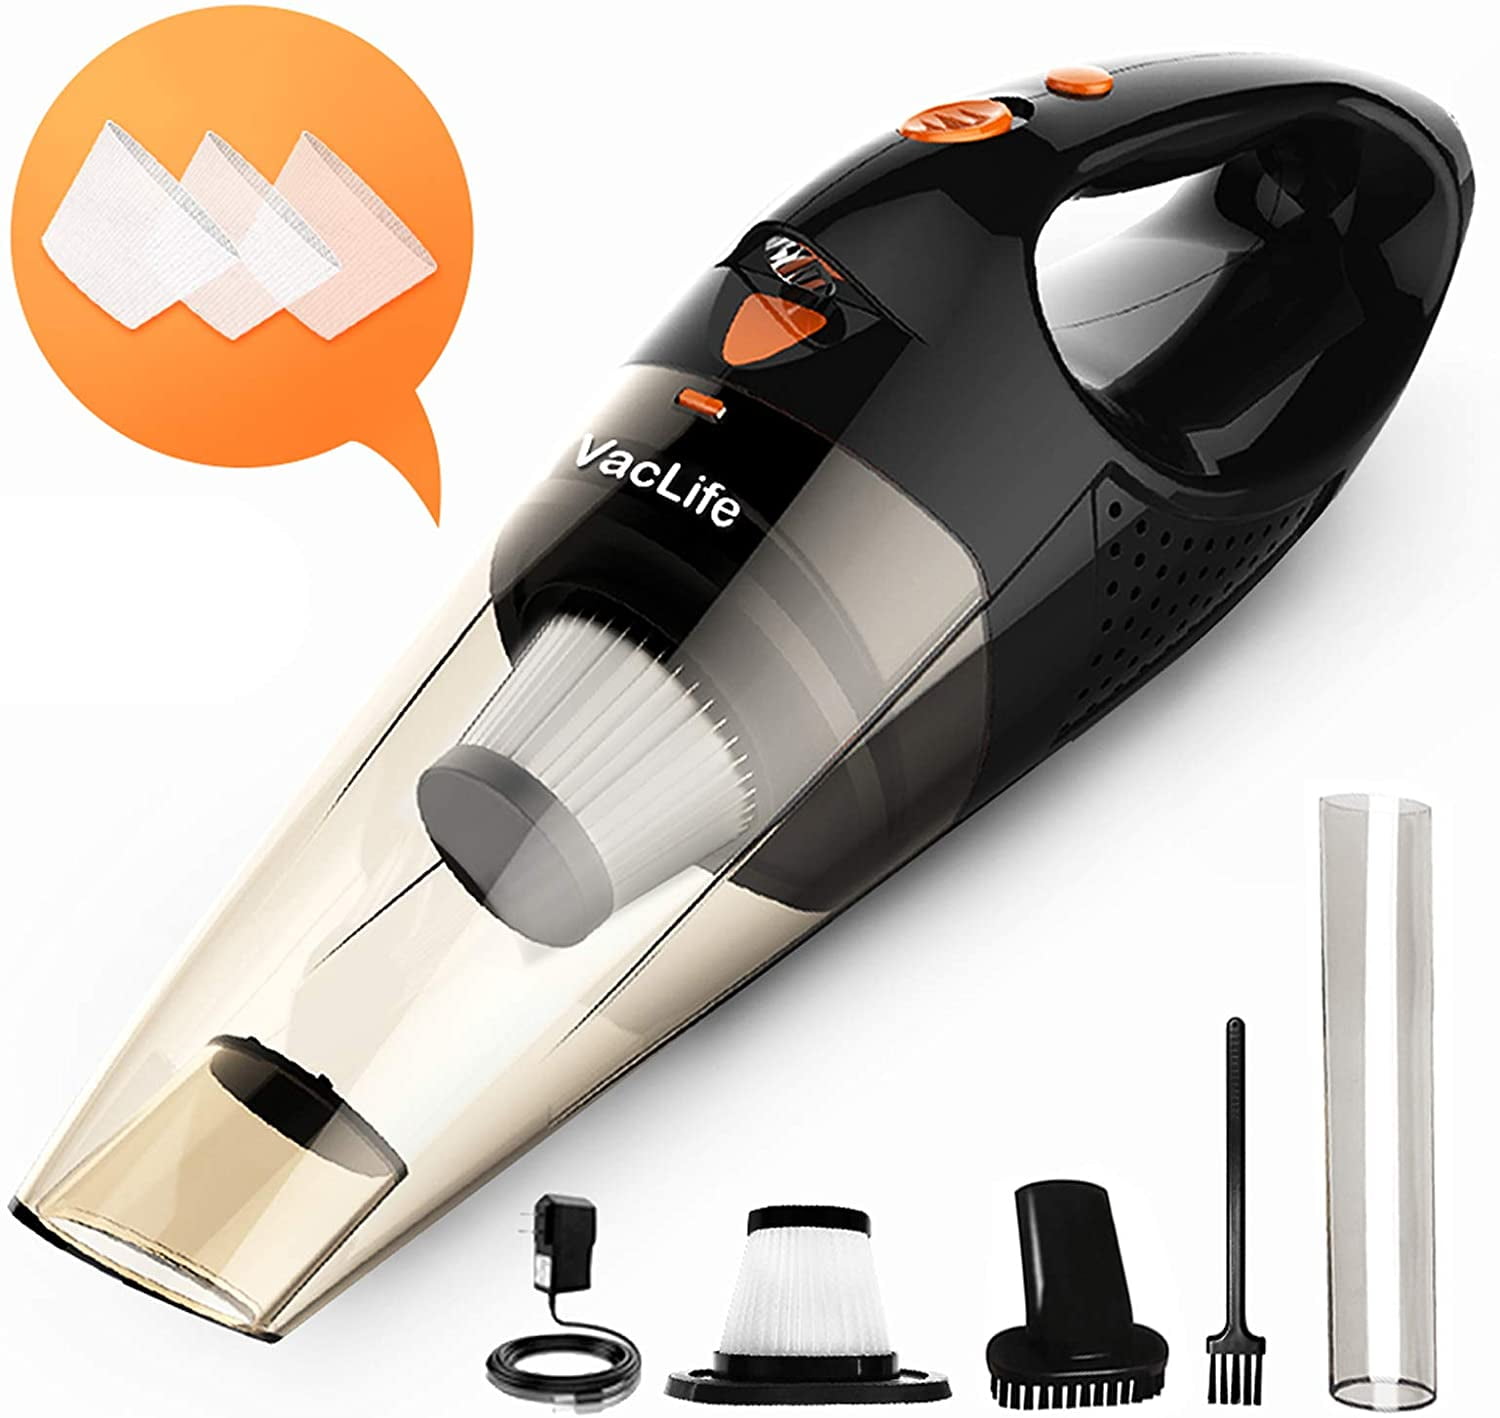 VacLife Handheld Vacuum, Hand Vacuum Cordless Rechargeable, Small and Portable with High Power and Quick Charge for Home and Car Cleaning - Black & Orange(VL189) - Walmart.com